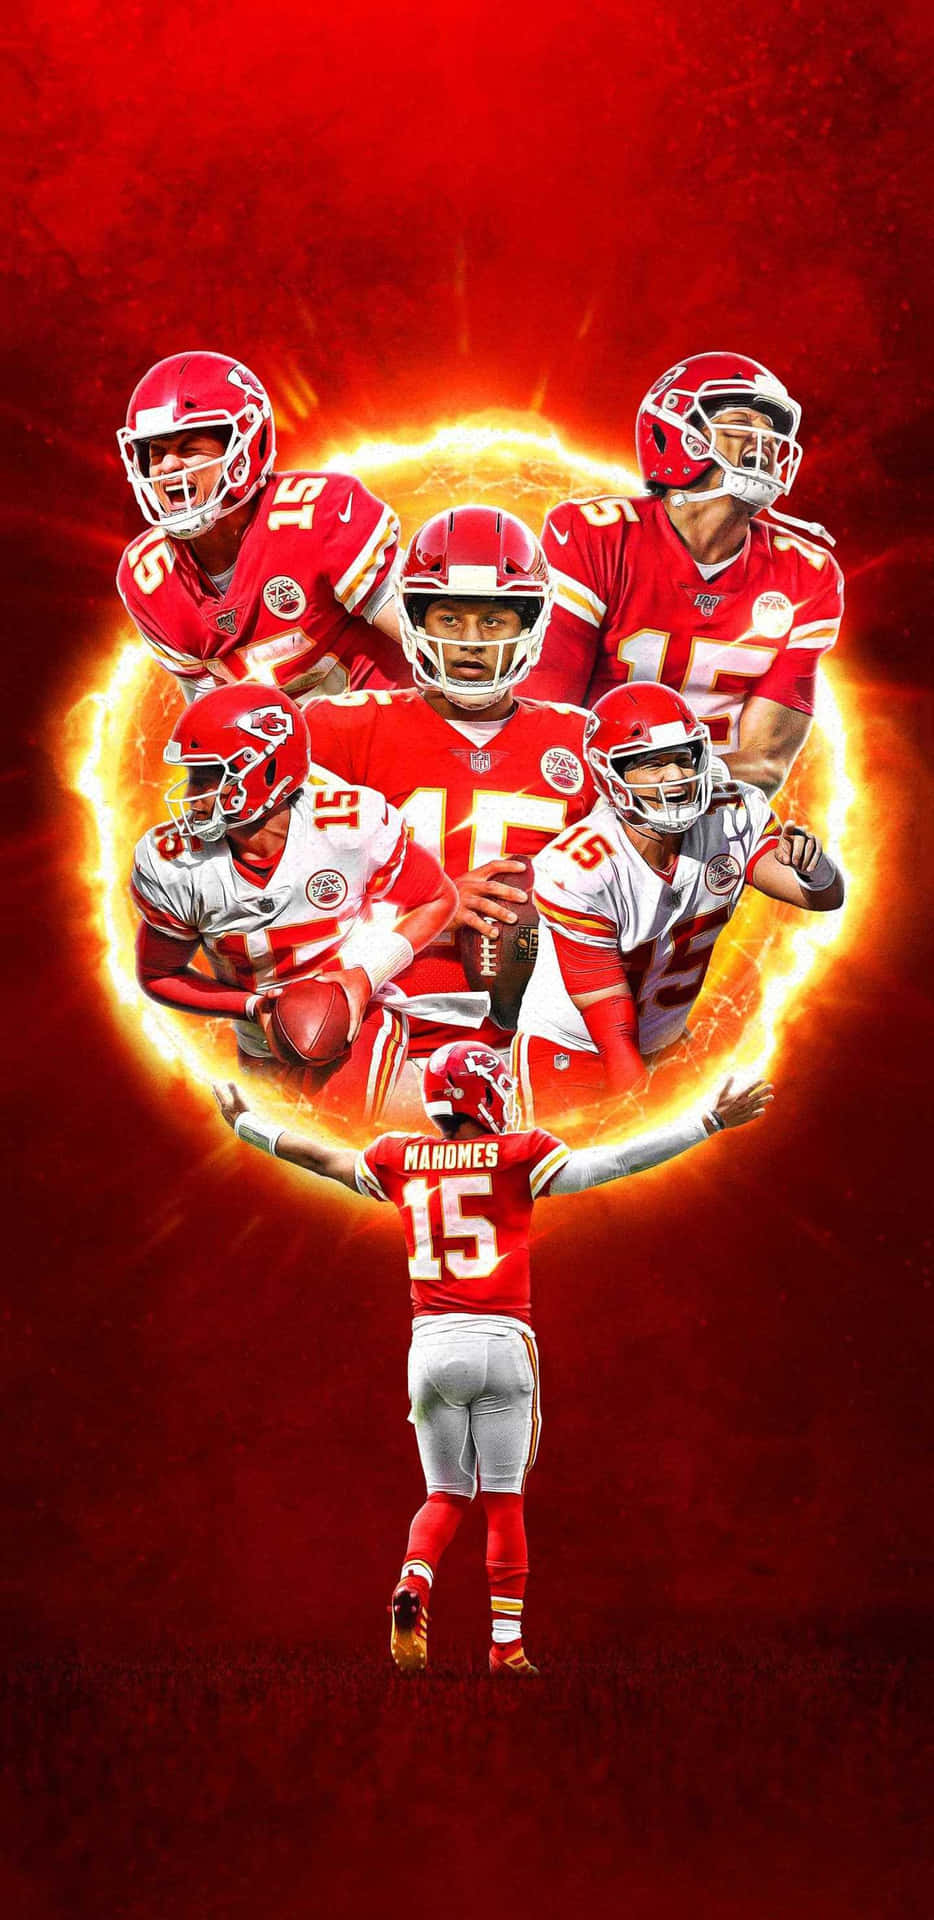 Patrick Mahomes Cool Graphic Artwork With Fire Wallpaper